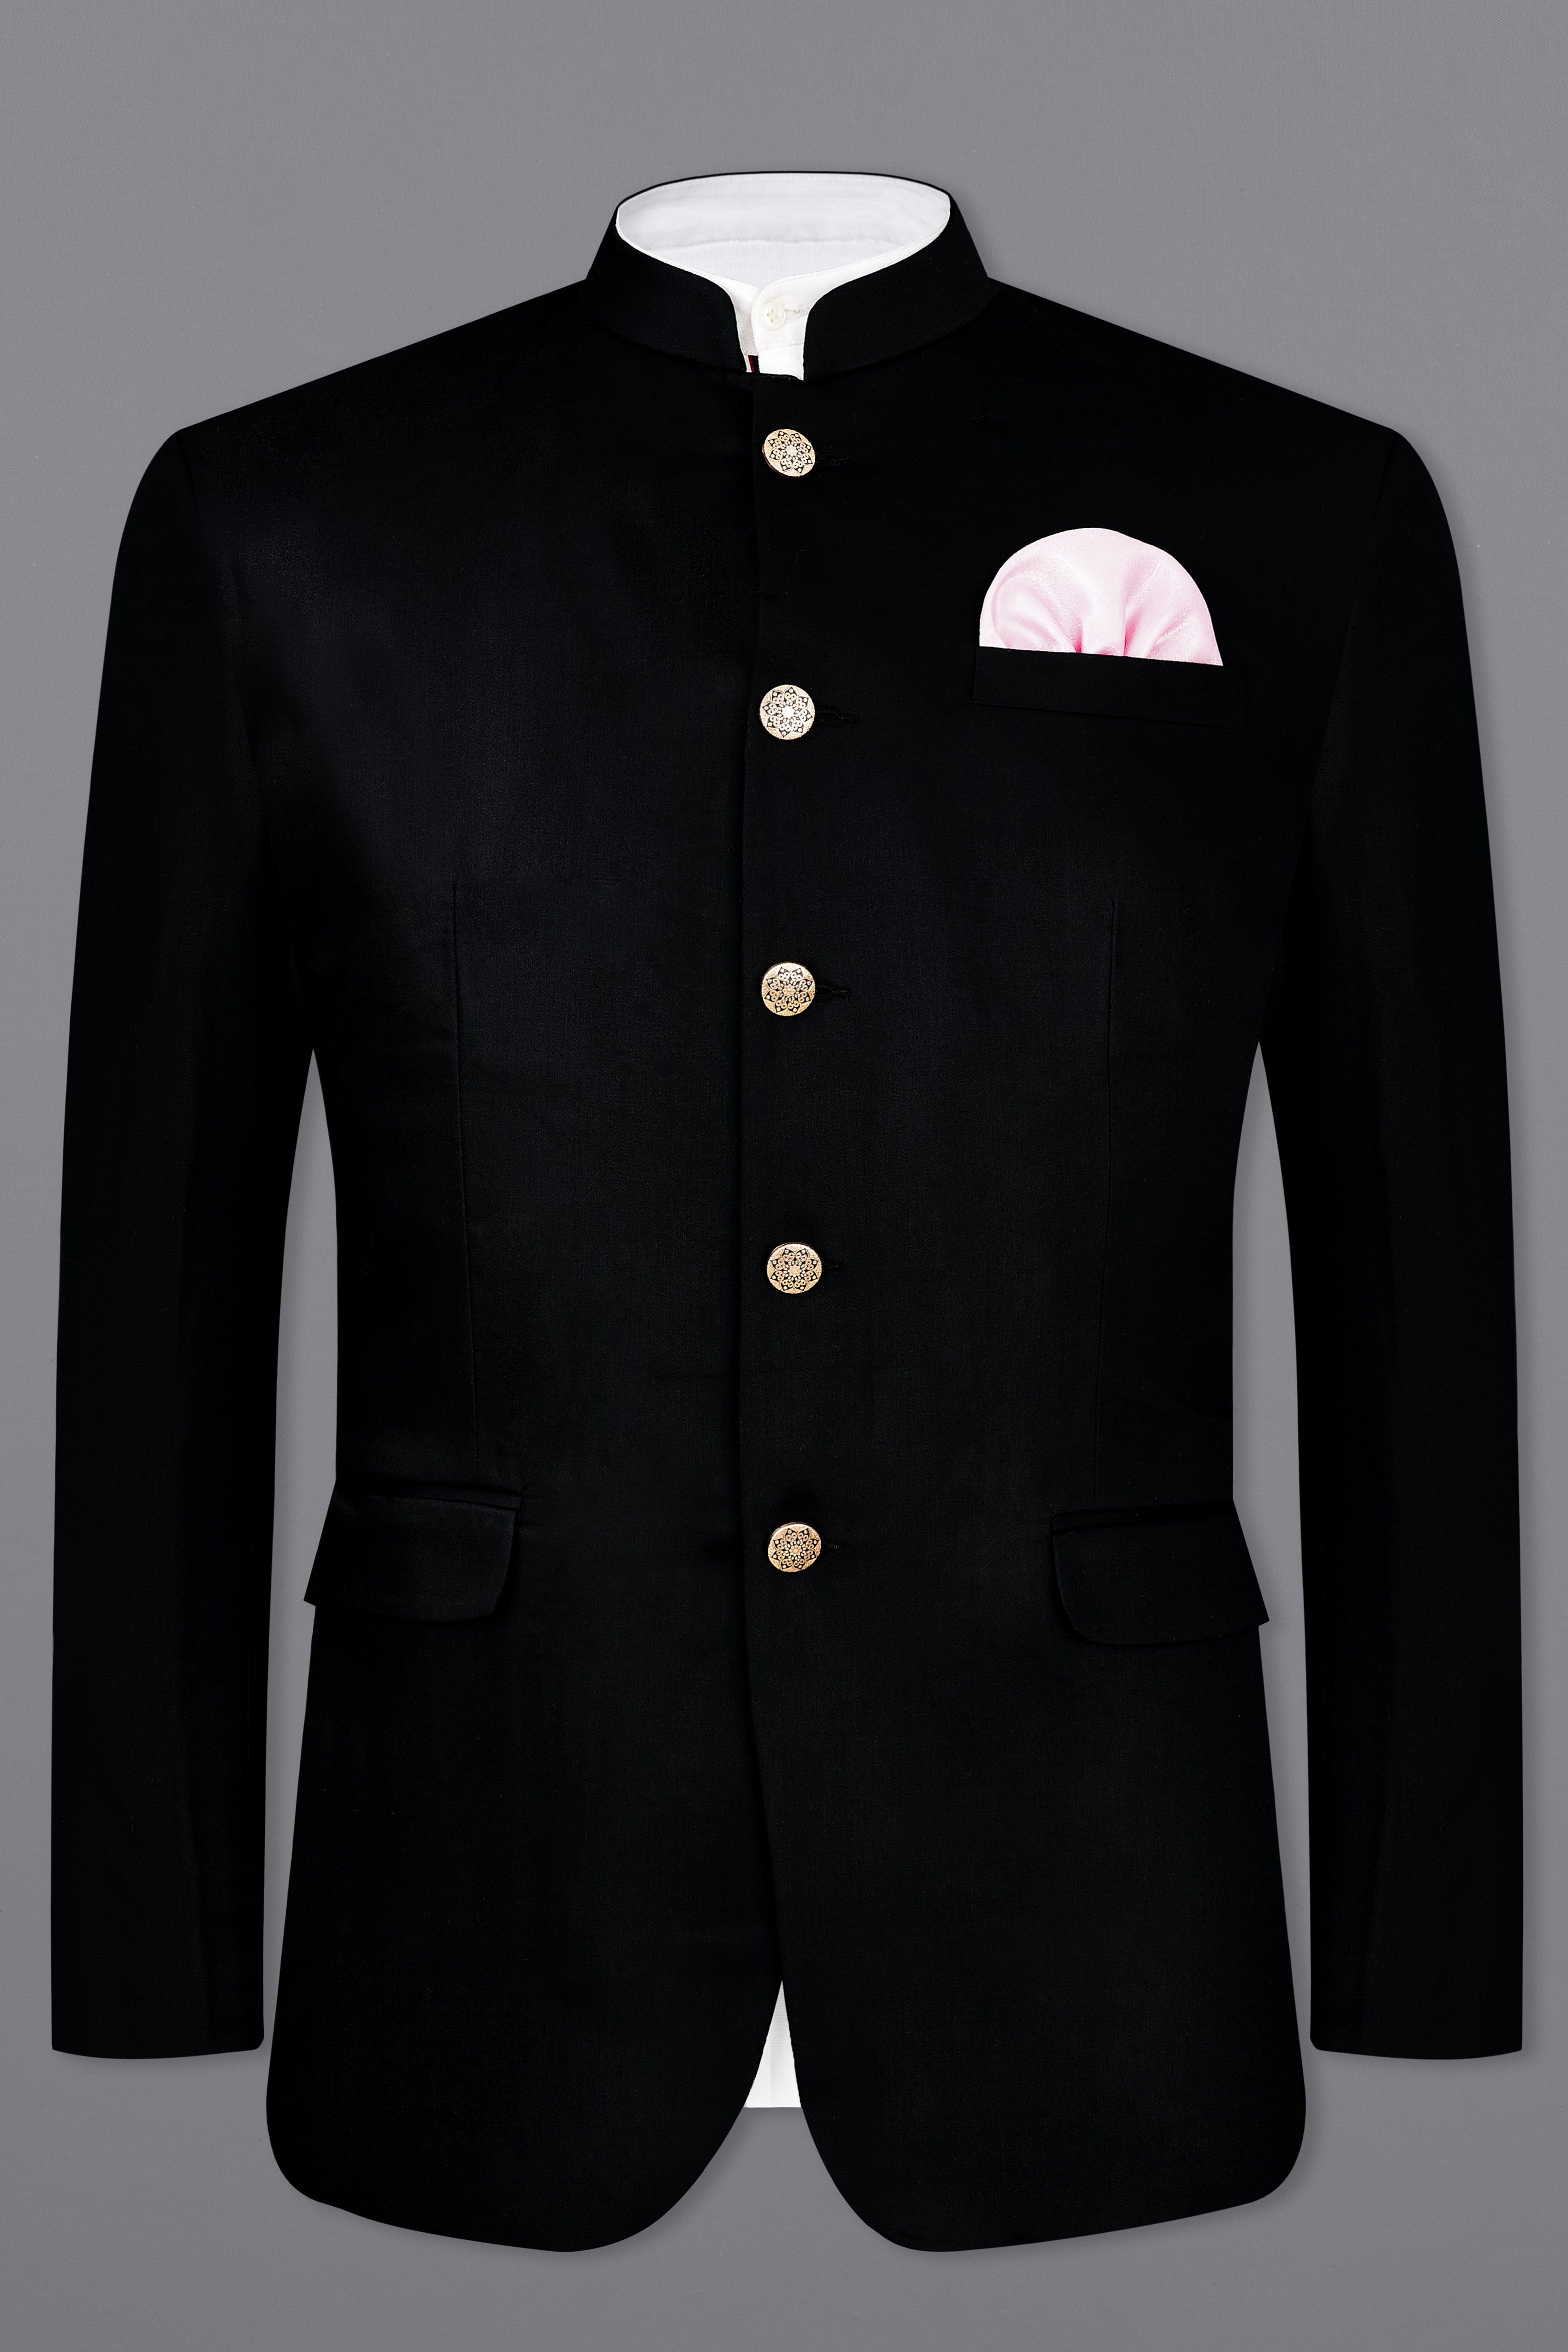 Blazers for Men: Best Selling Blazers for Men - The Economic Times